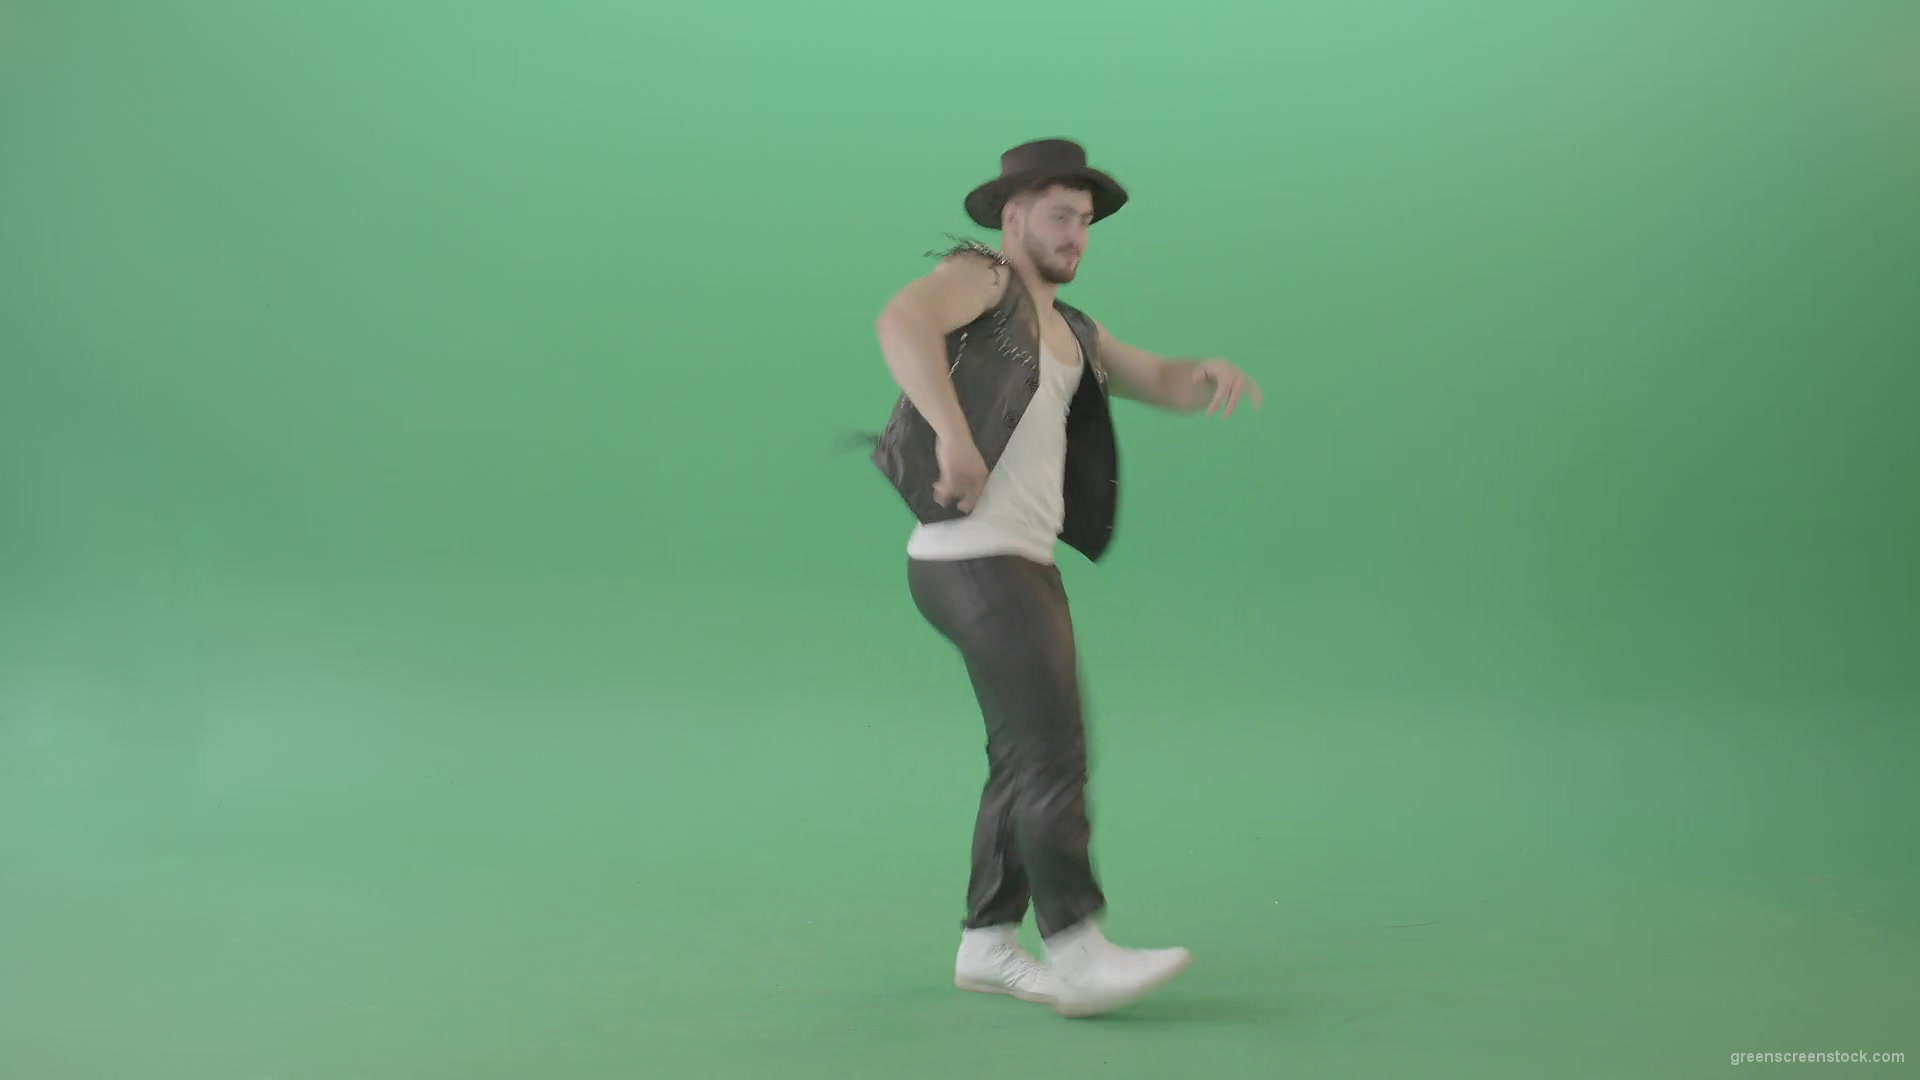 American-Man-with-beard-and-in-black-hat-dancing-Shuffle-isolated-on-Chroma-key-green-screen-4K-Video-Footage-1920_008 Green Screen Stock